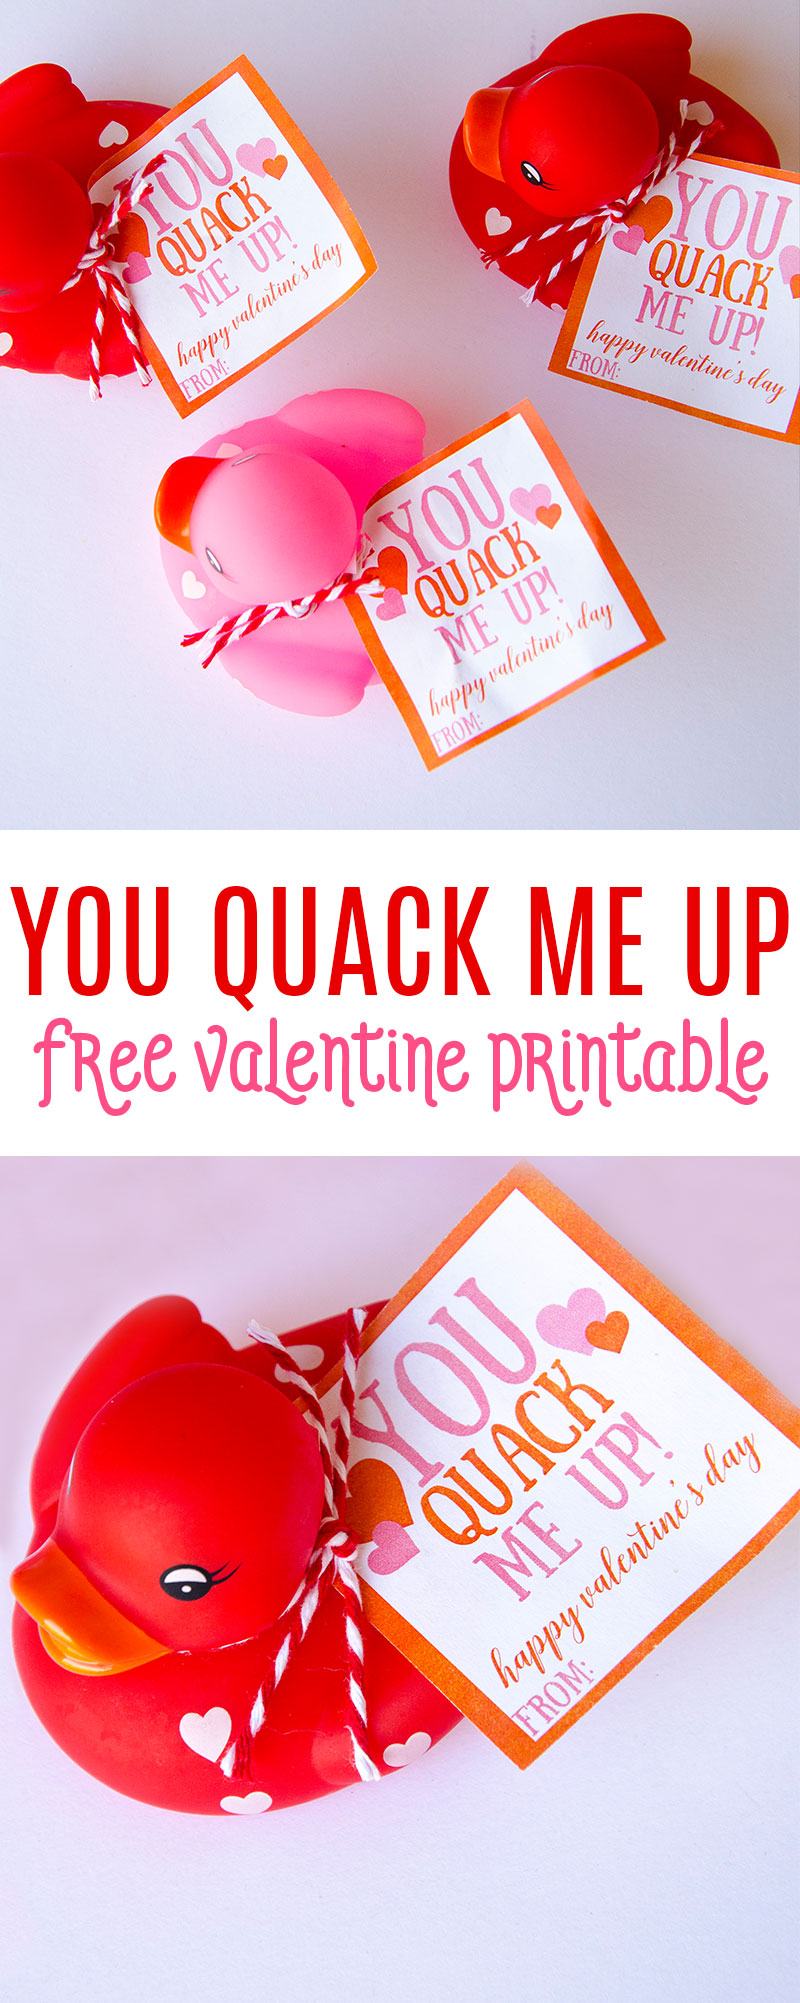 Rubber Duck Valentine Ideas for Preschoolers & FREE PRINTABLE by Lindi Haws of Love The Day